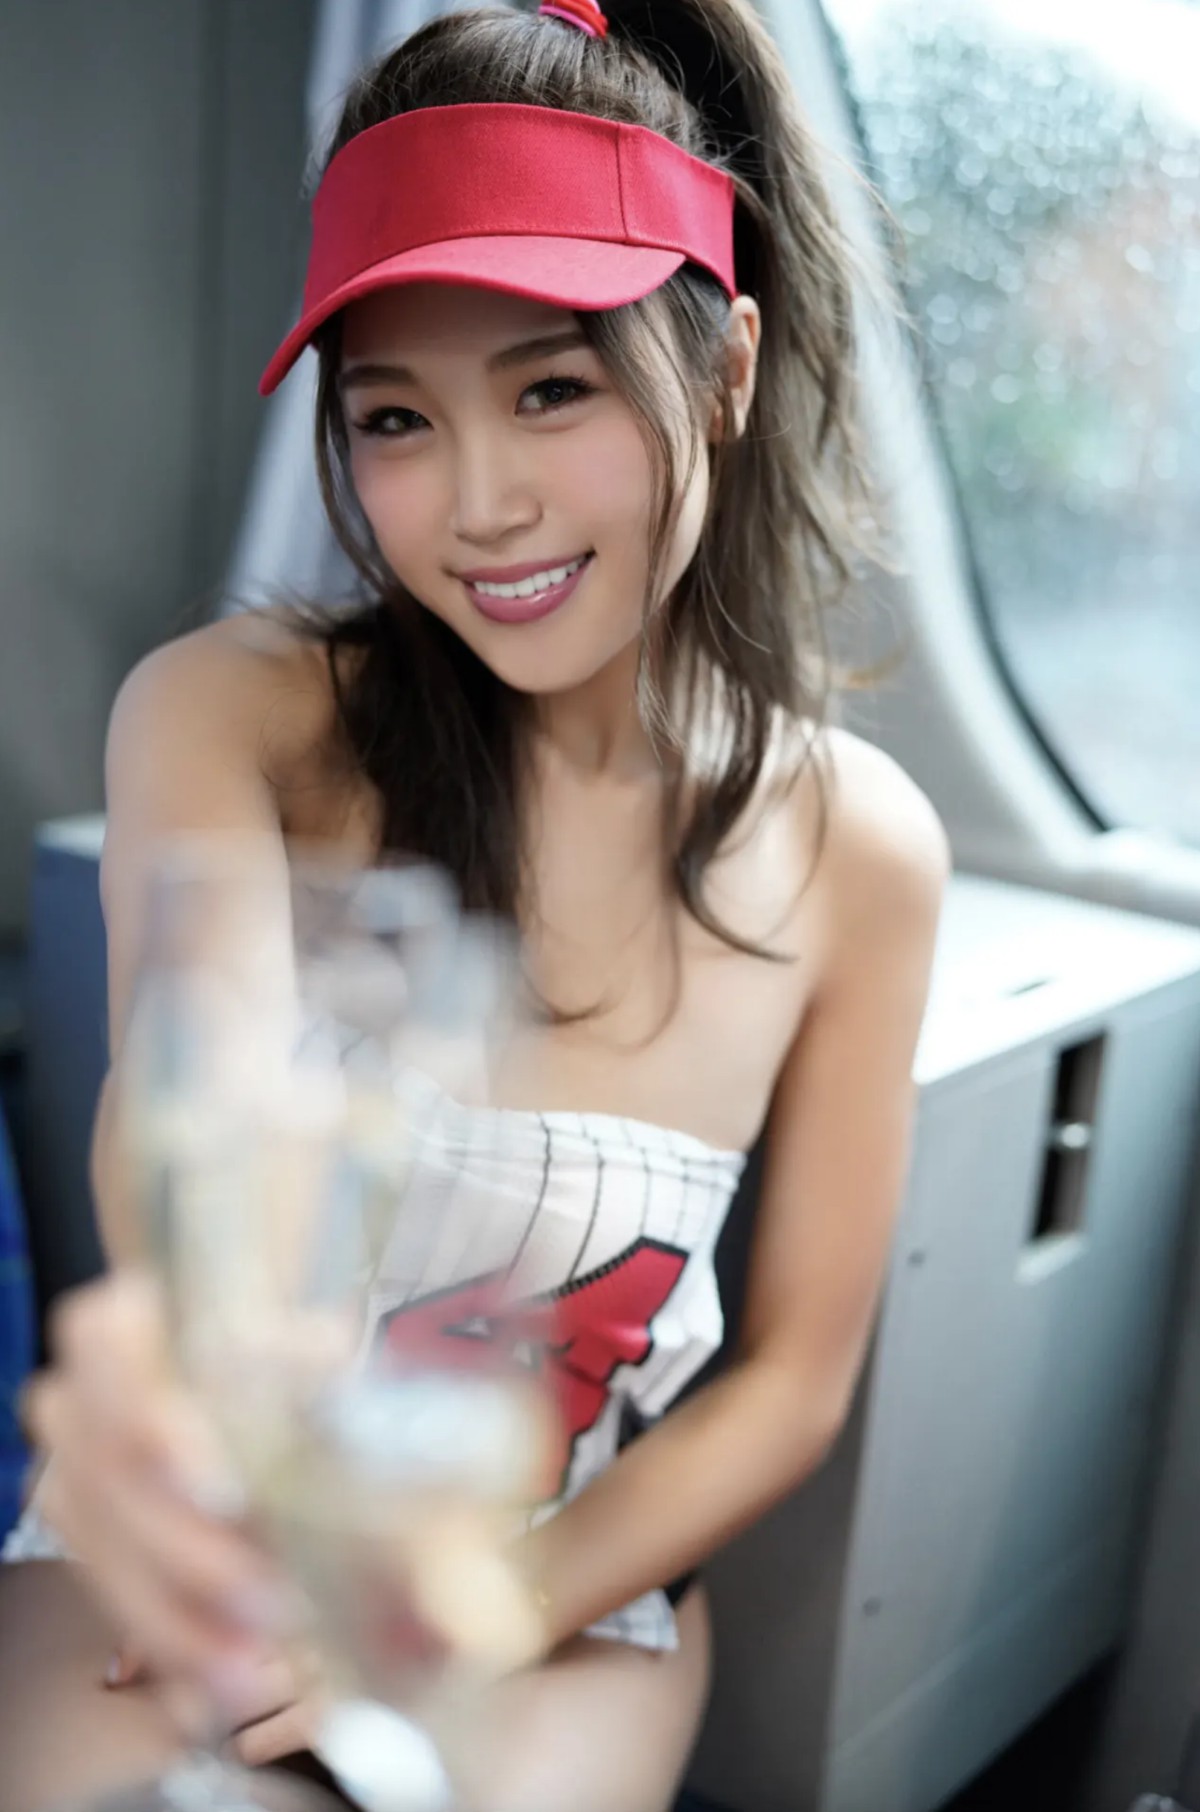 FRIDAYデジタル写真集 Cyber Japan Dancers Onsen Bus Tour Vol 1 With You 0012 6319618940.jpg